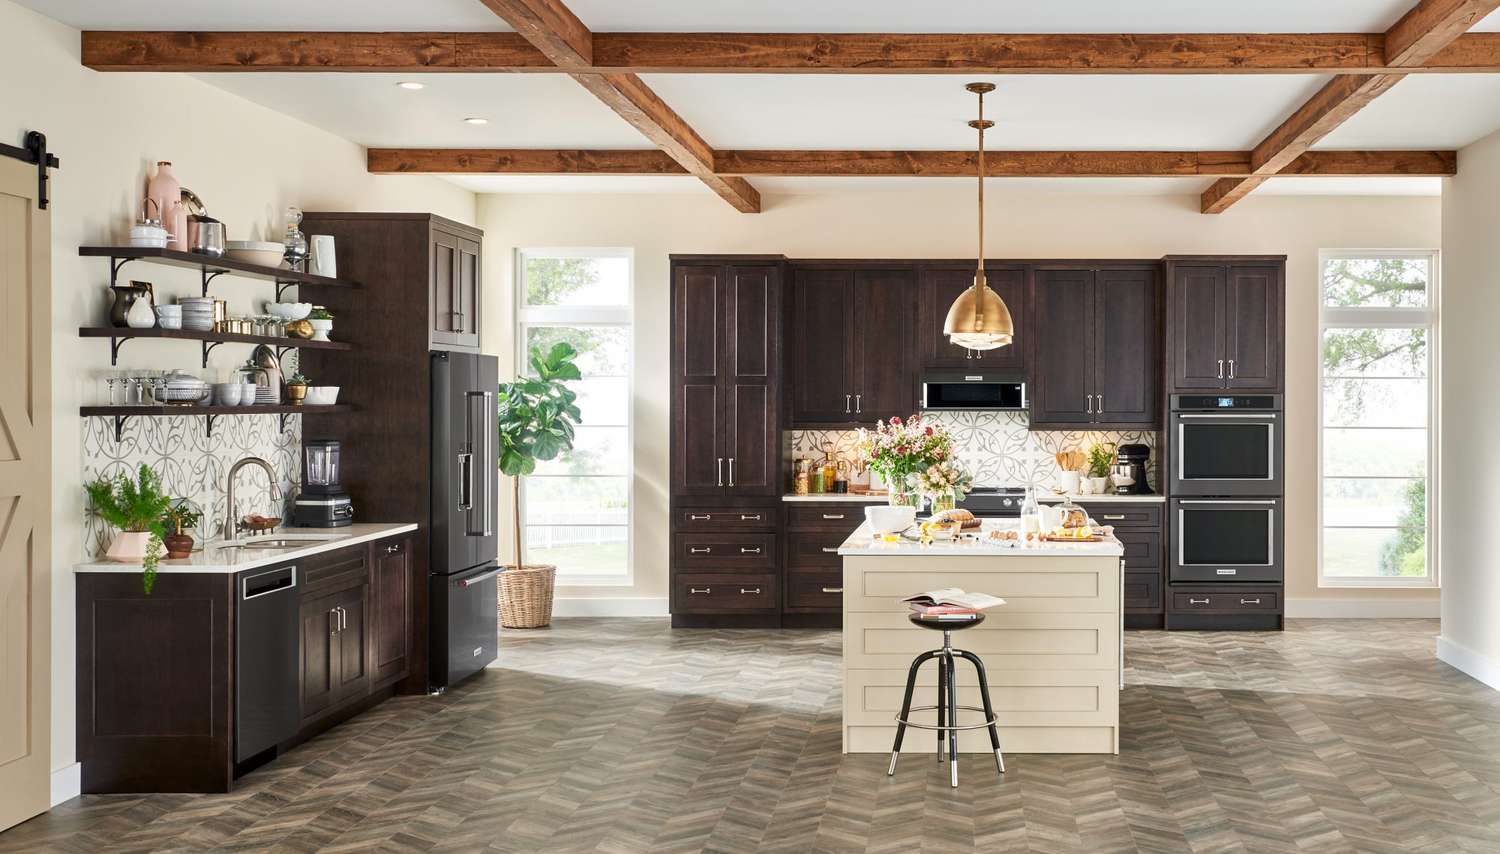 kitchen with exposed beams